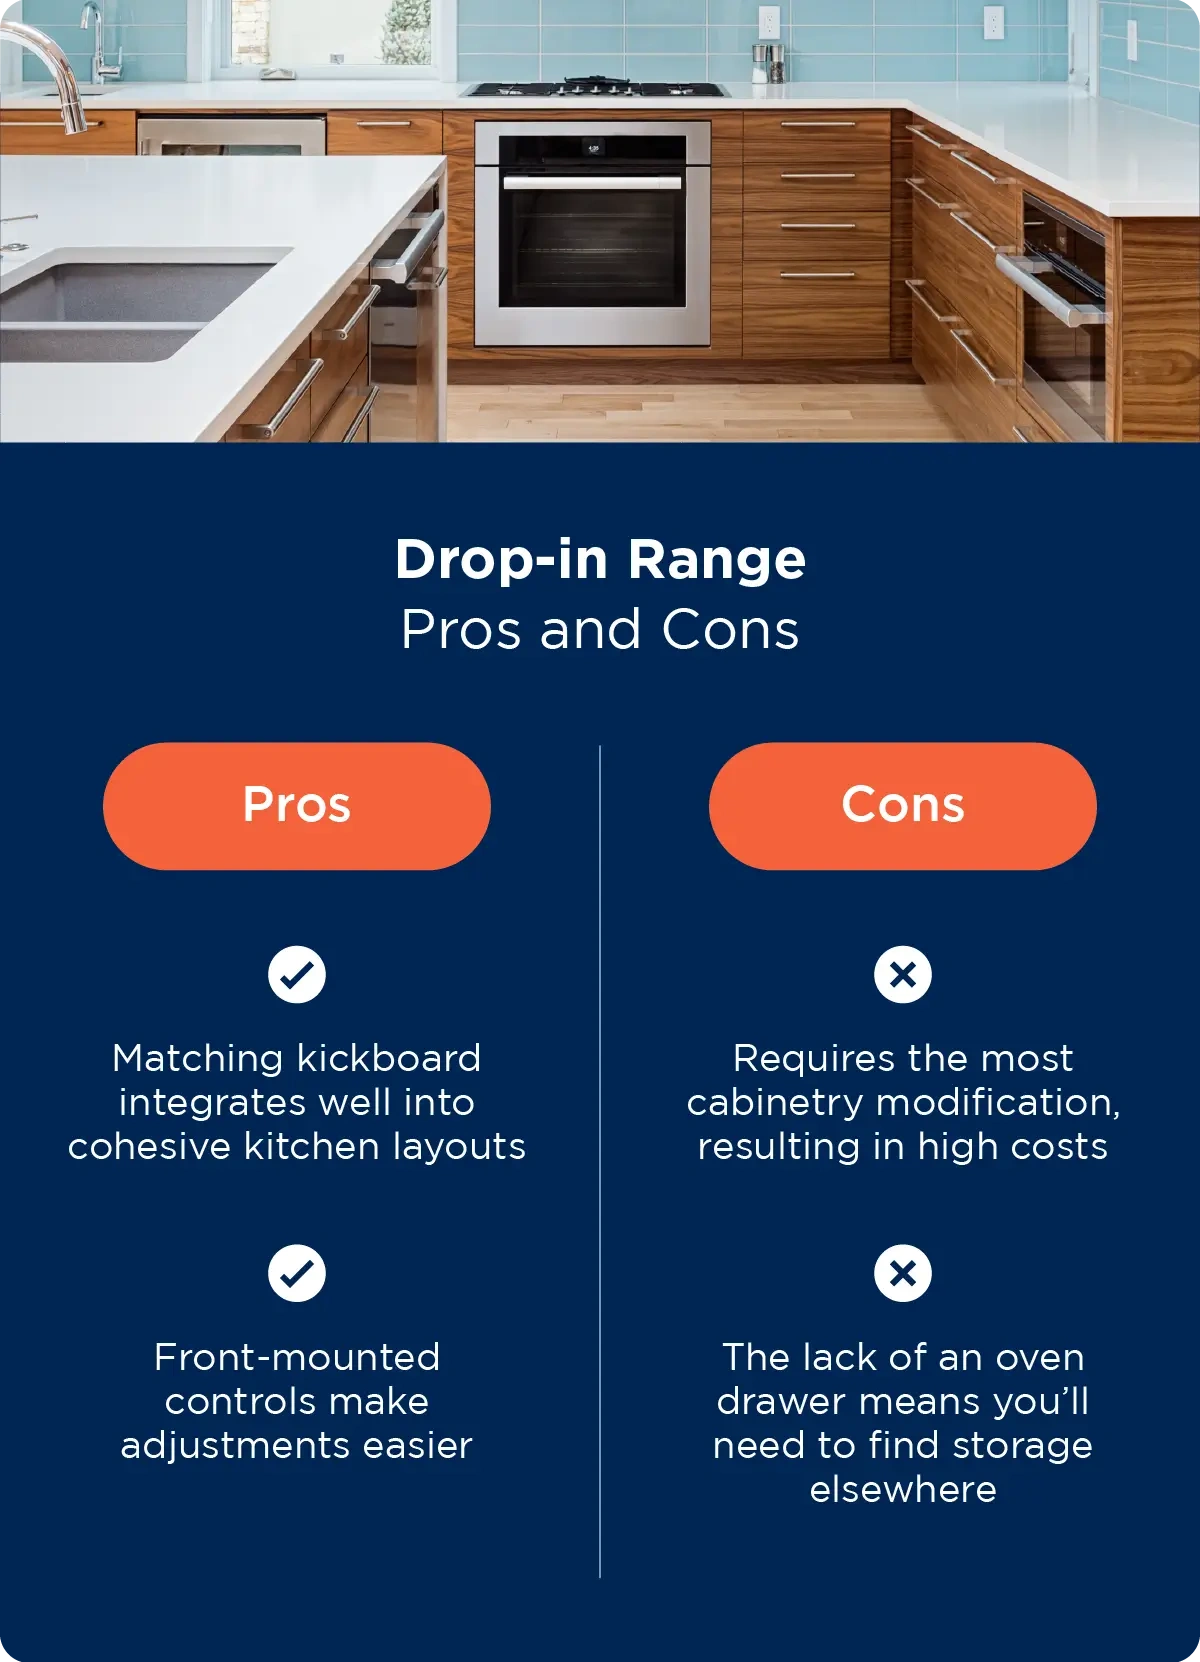 Pros and cons of a freestanding range | drop-in-range-pros-cons.